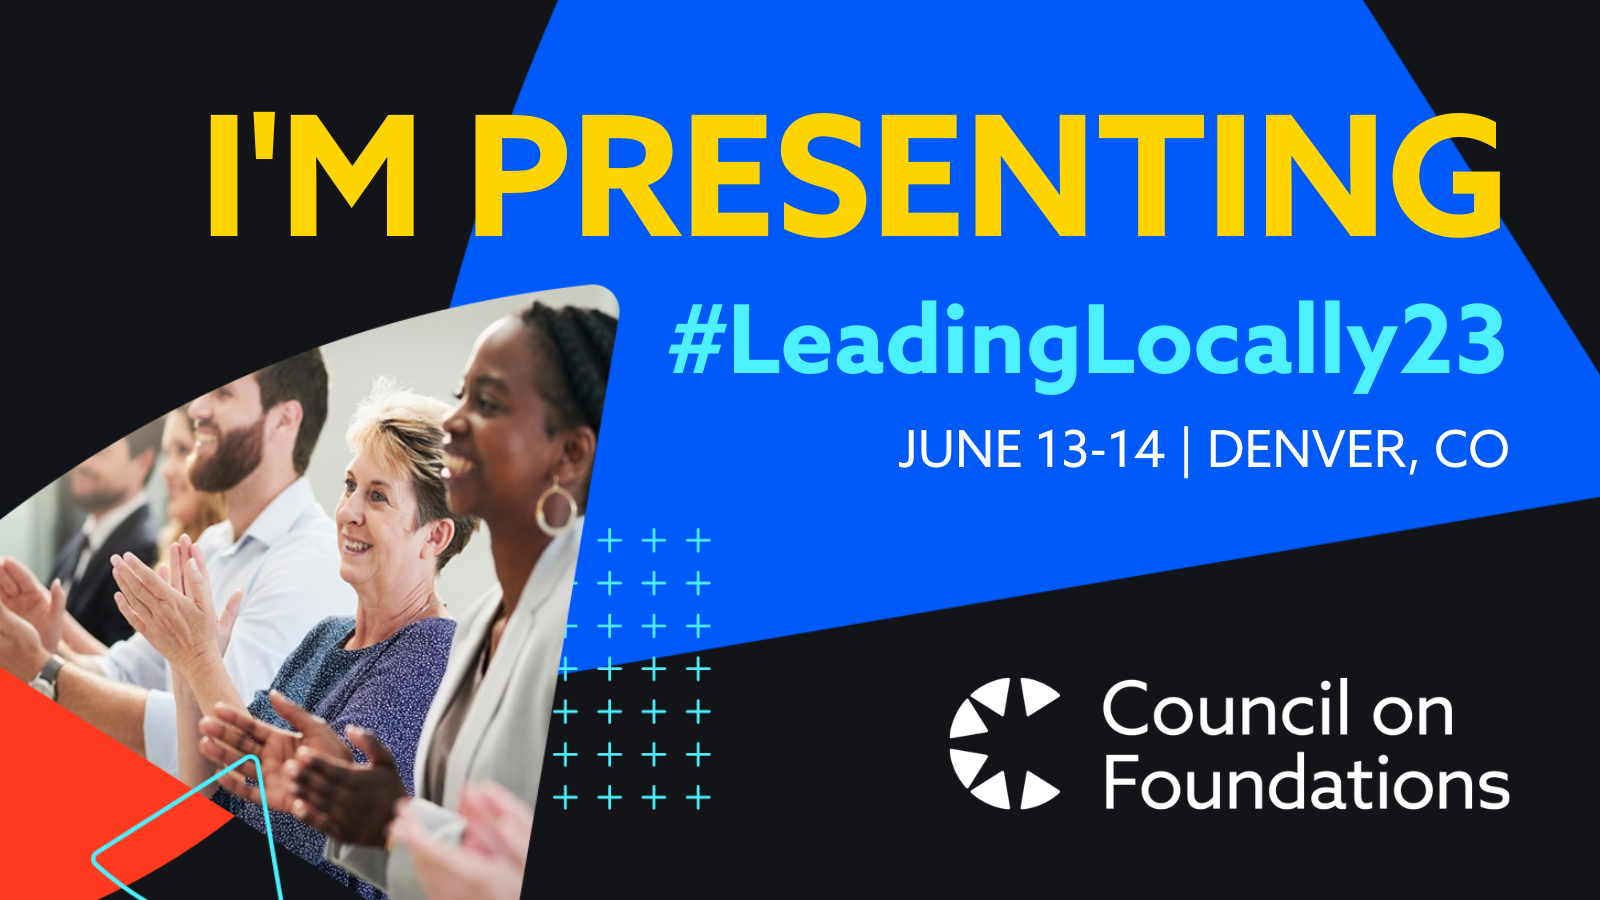 I'm Presenting at #LeadingLocally23, June 13-14 in Denver, CO